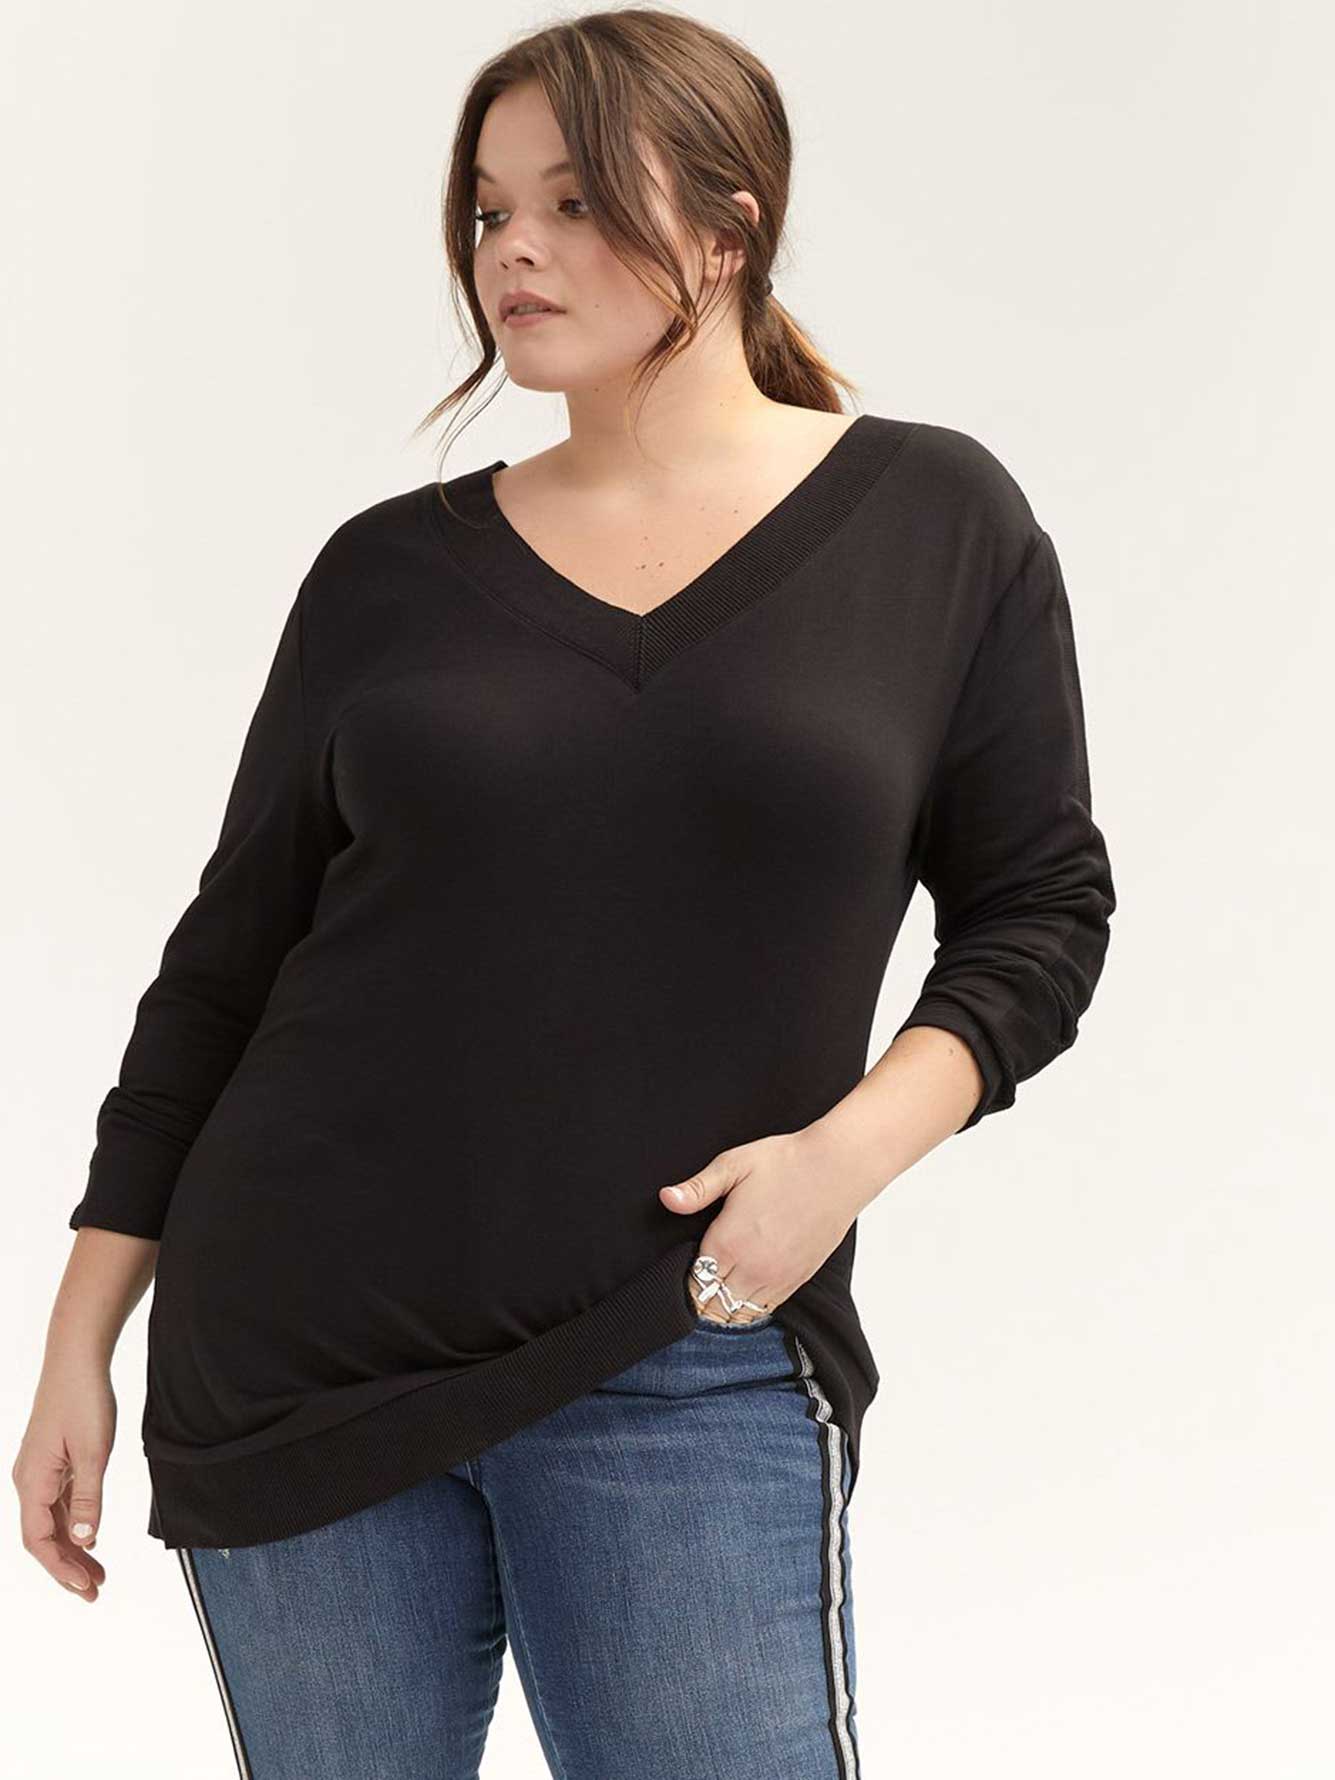 Relaxed V-Neck Sweatshirt with Ribbed Insert - L&L | Addition Elle